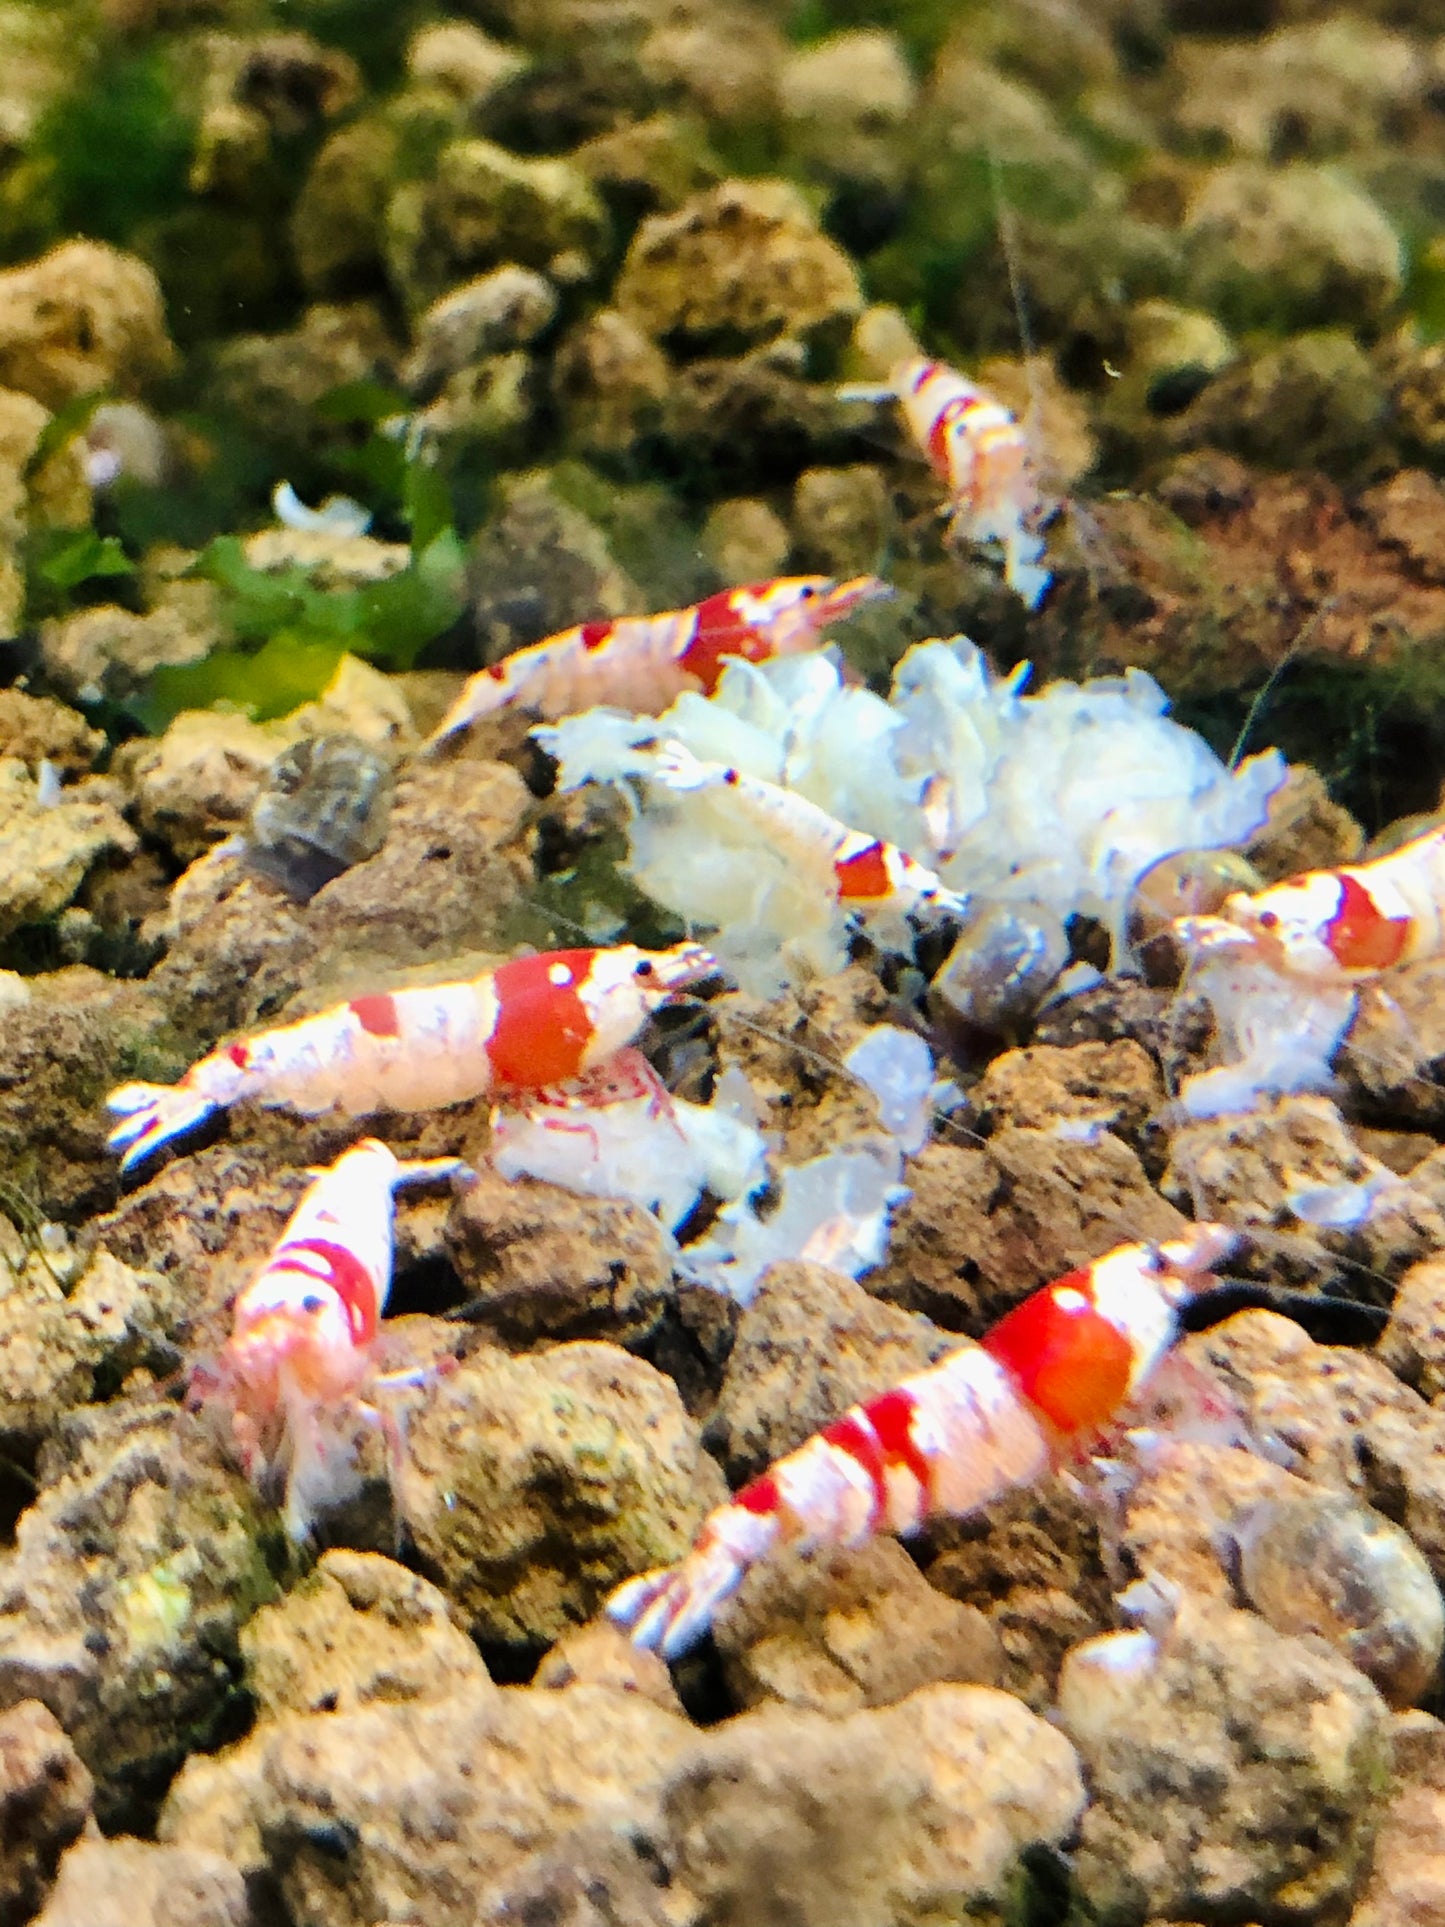 Crystal red shrimp crs (tap water)